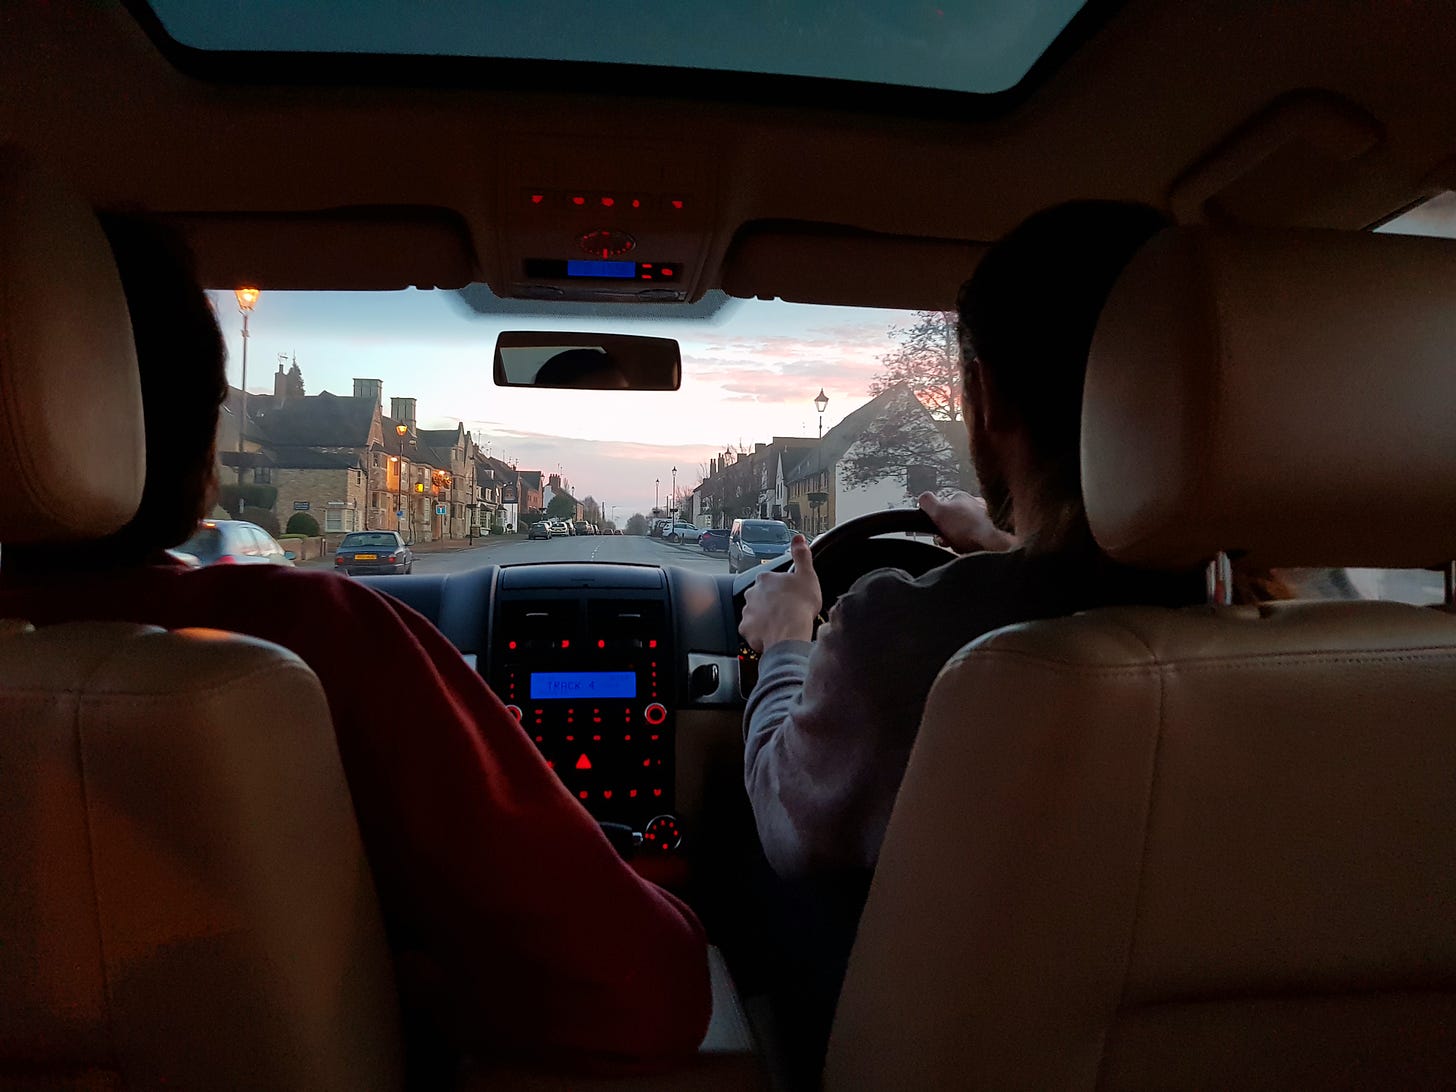 Photo taken from the back seat of a car shows a young man driving and an older man in the front passenger’s seat. Through the windshield, a sunset can be partially seen lighting the sky over a village high street, with shades of pink and orange.